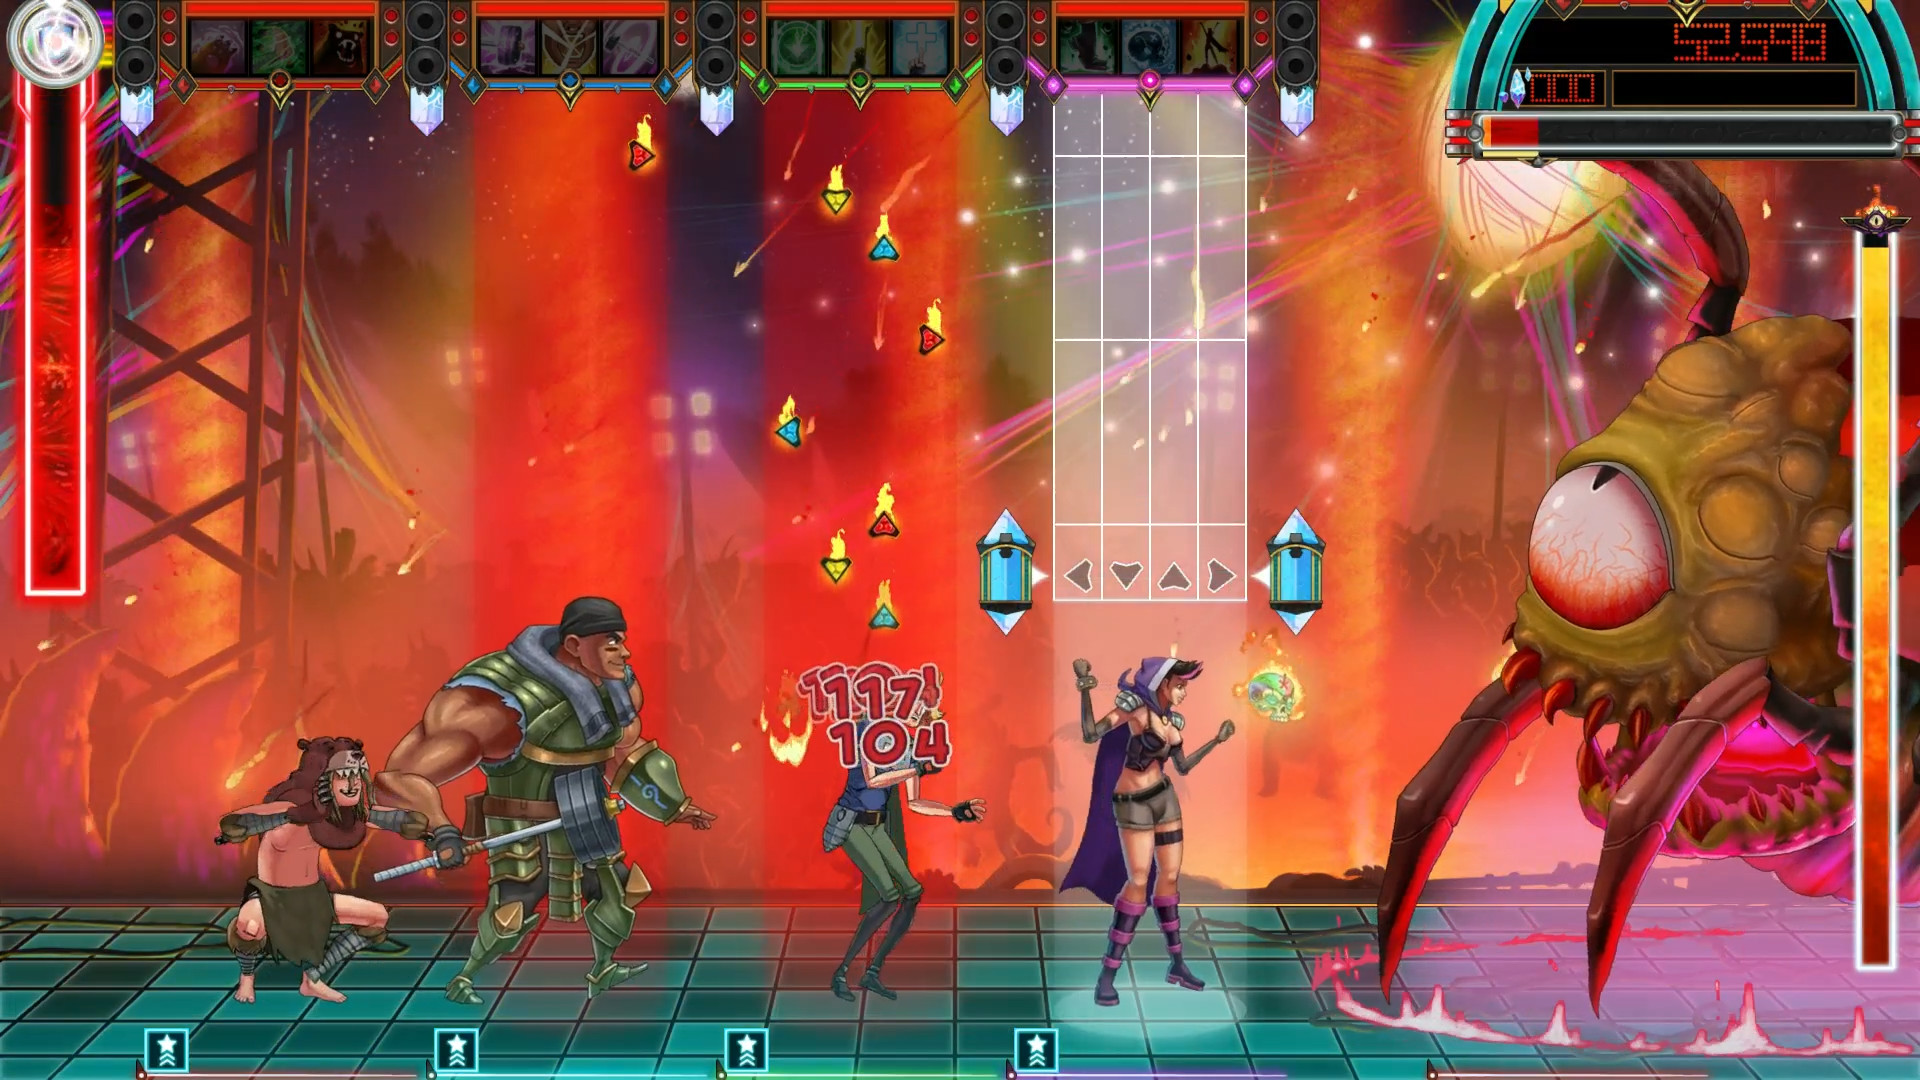 for iphone download The Metronomicon